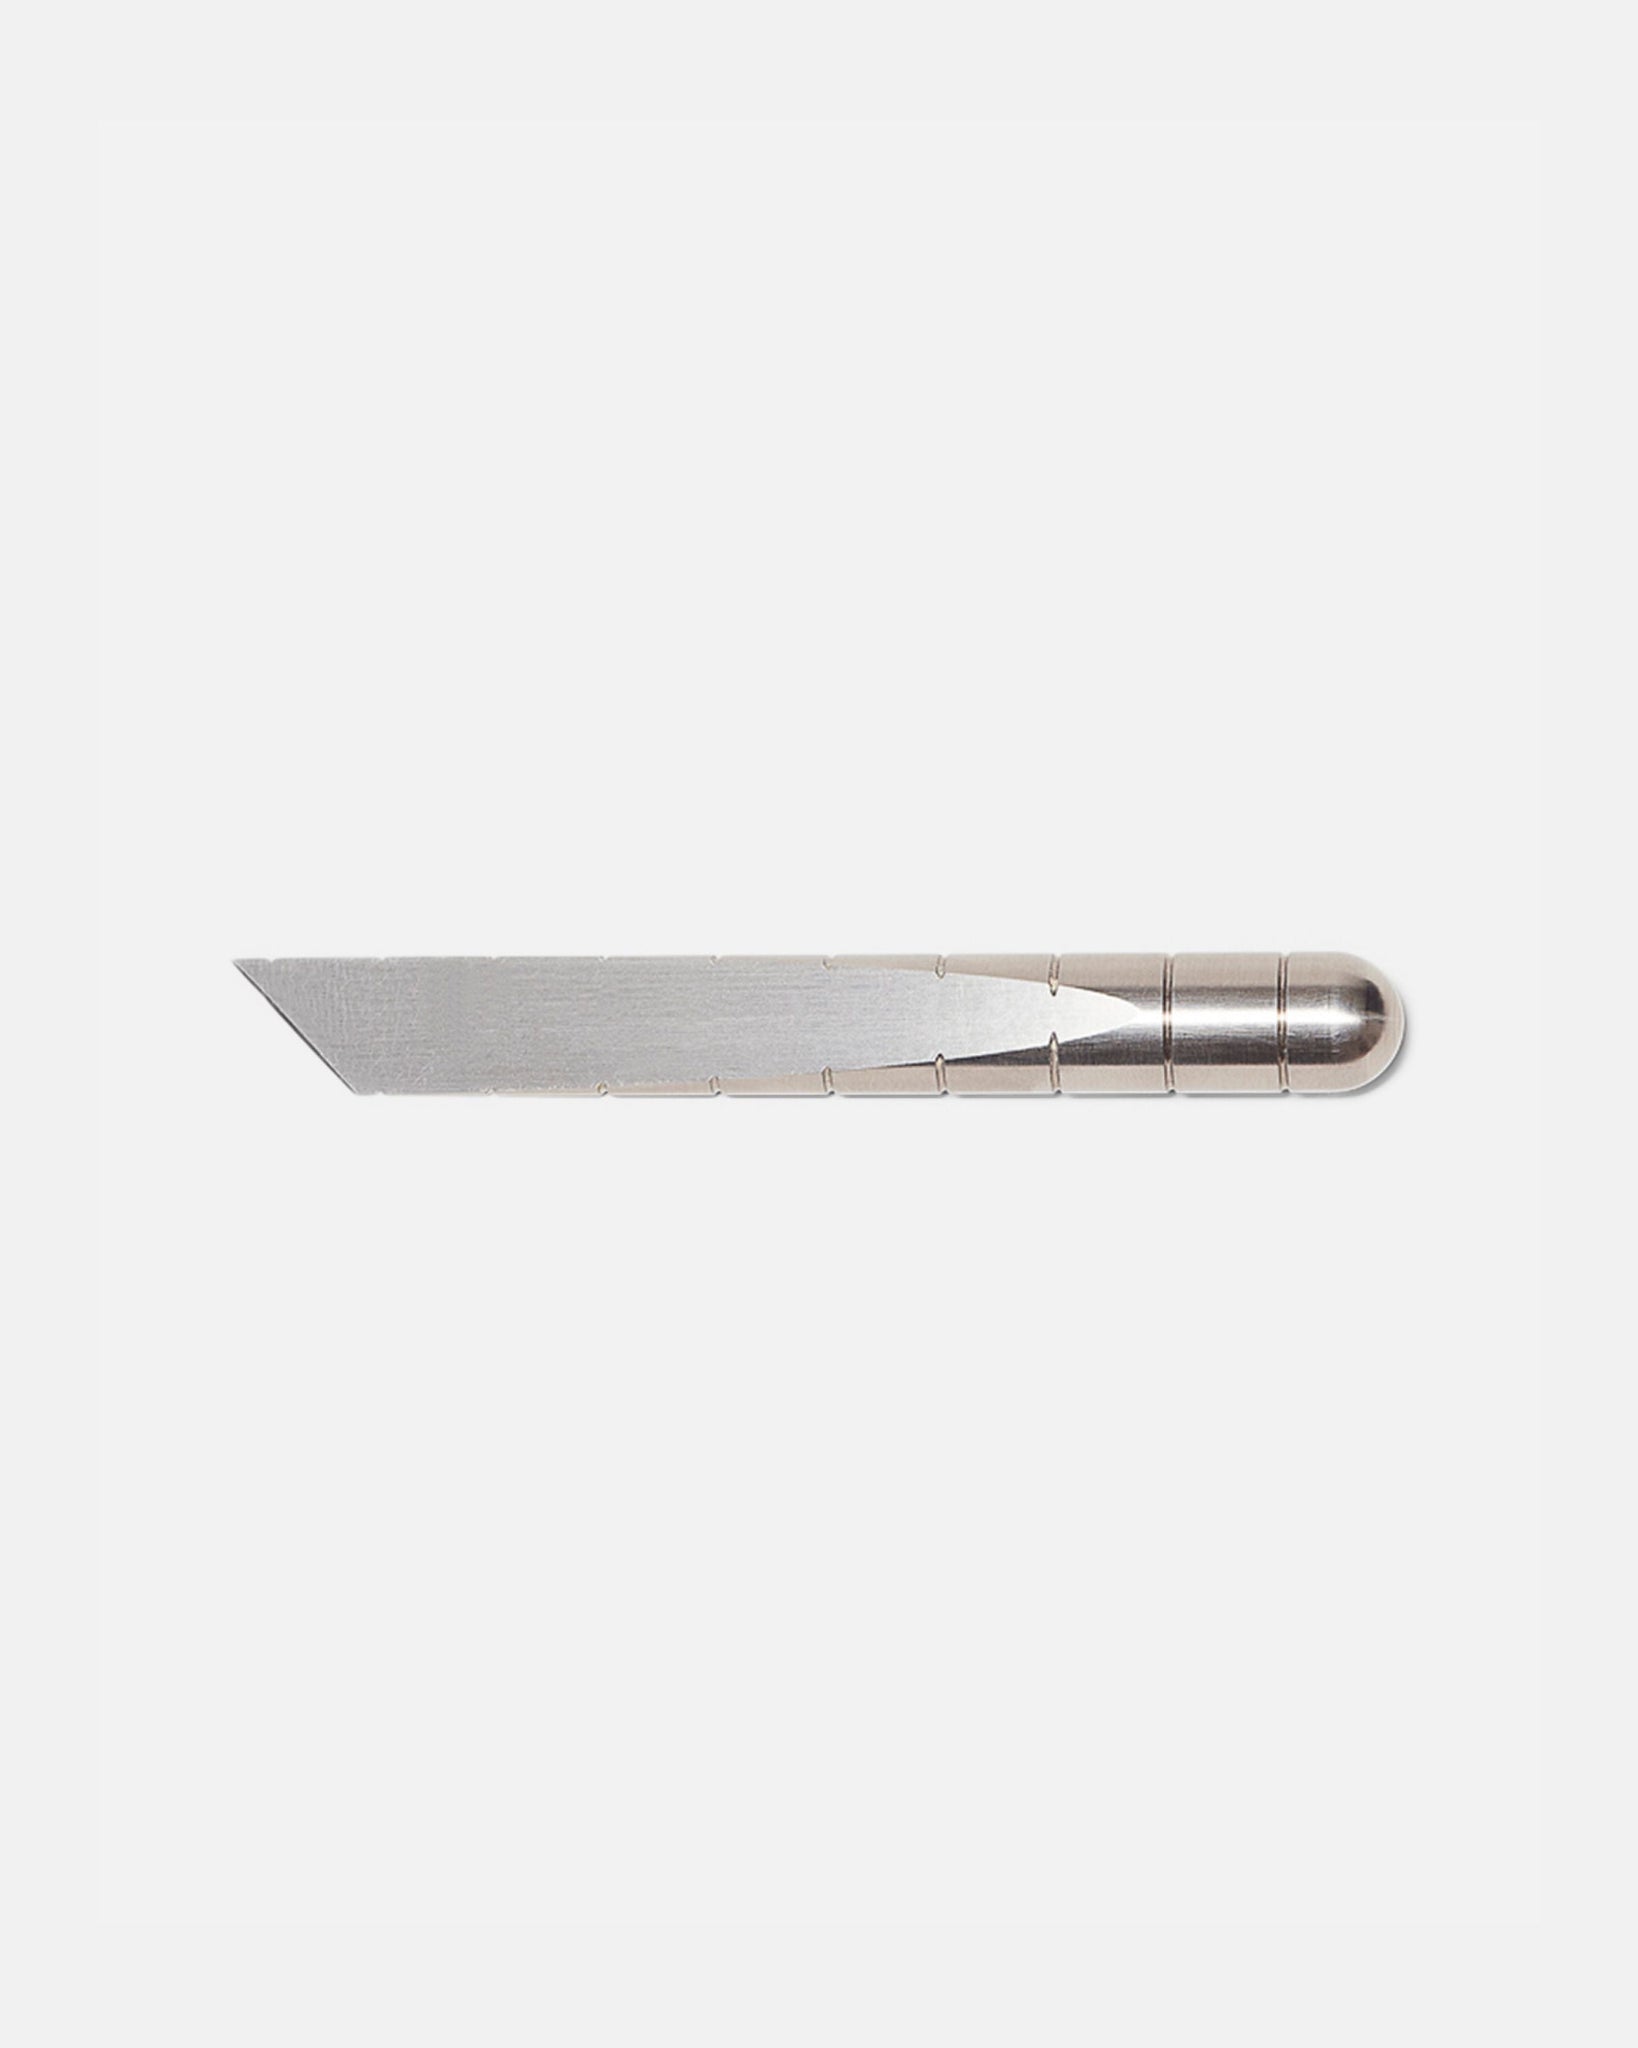 Desk Knife by Craighill